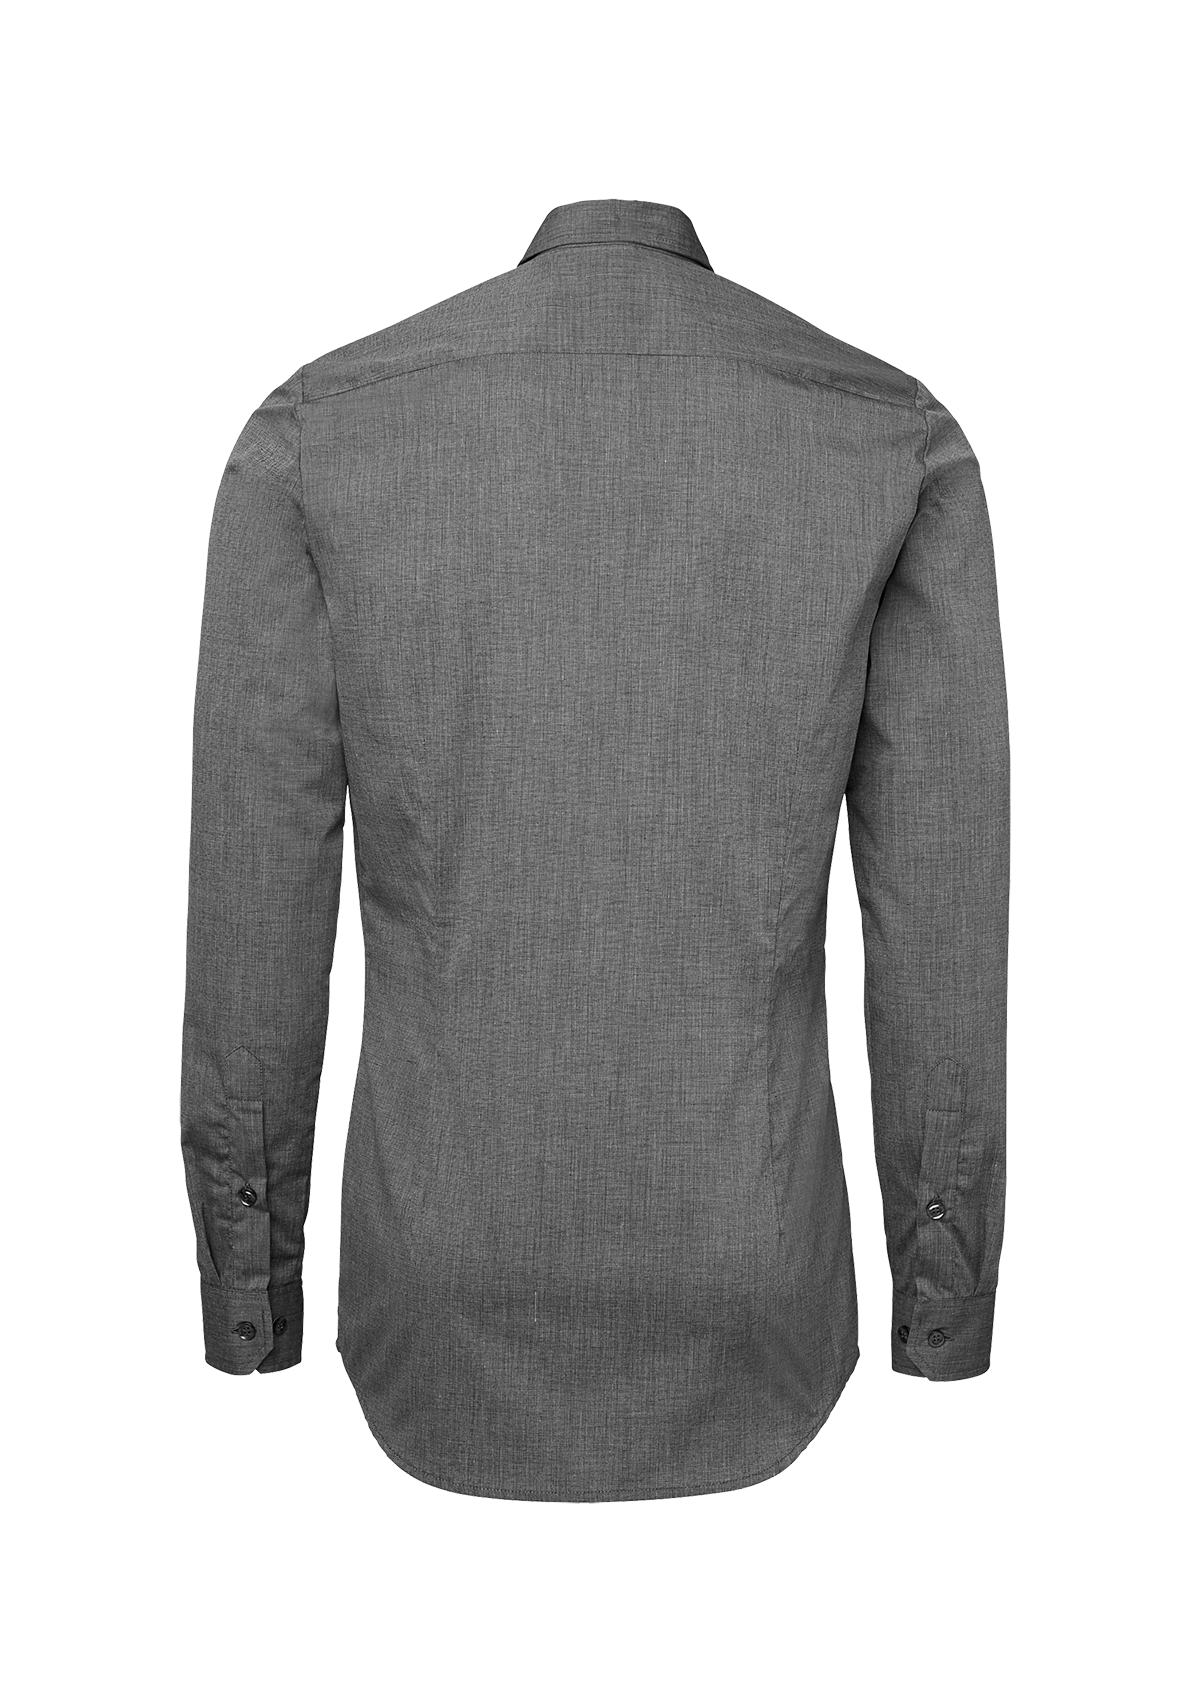 Men's slim-fit shirt with long sleeves. Segers | Cookniche